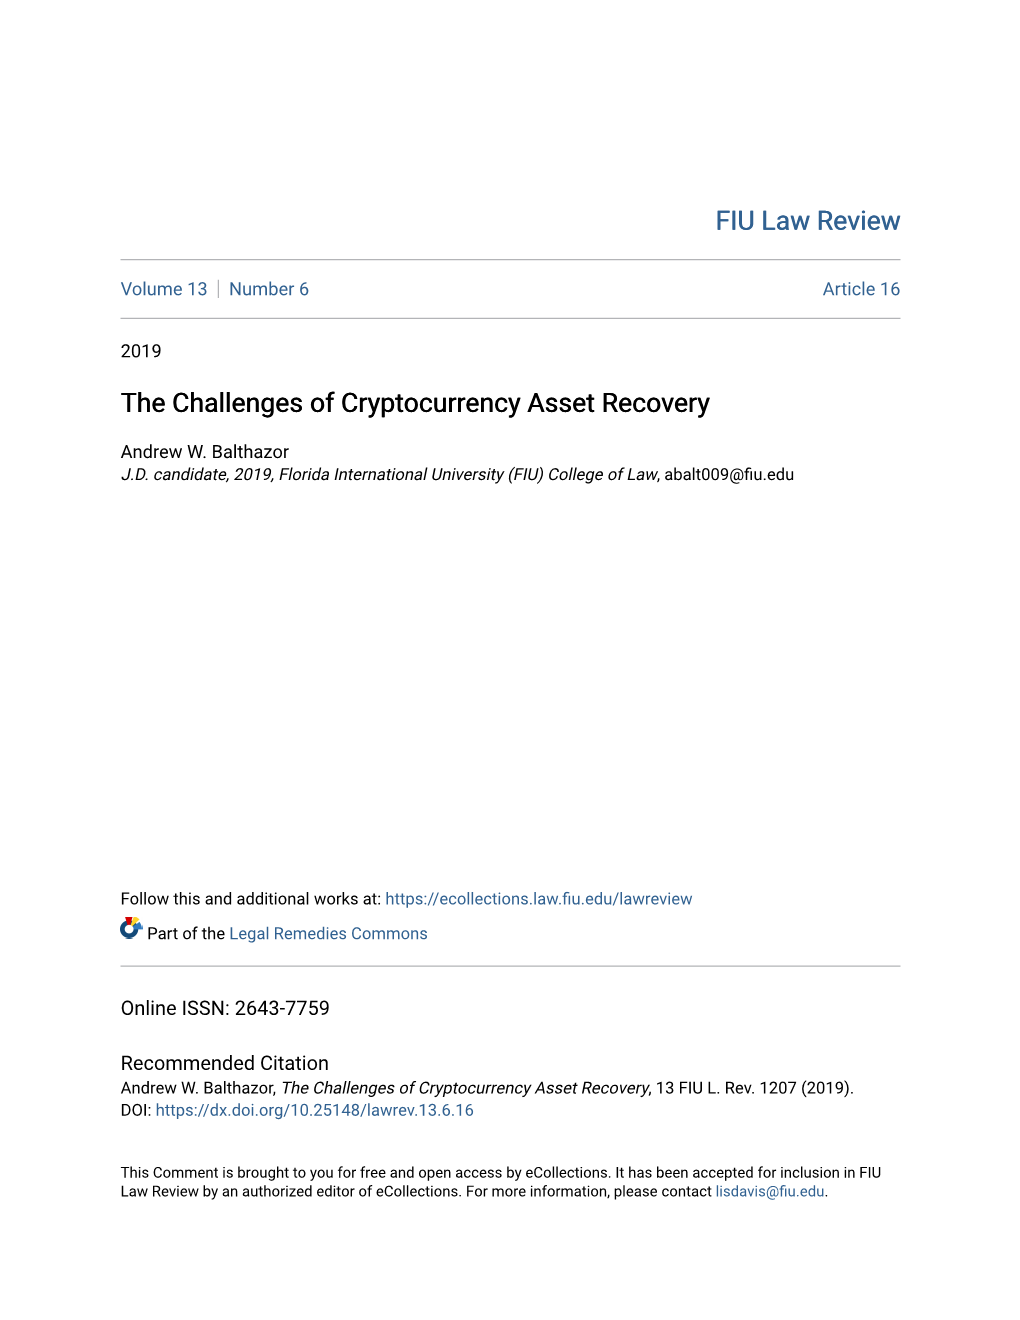 The Challenges of Cryptocurrency Asset Recovery